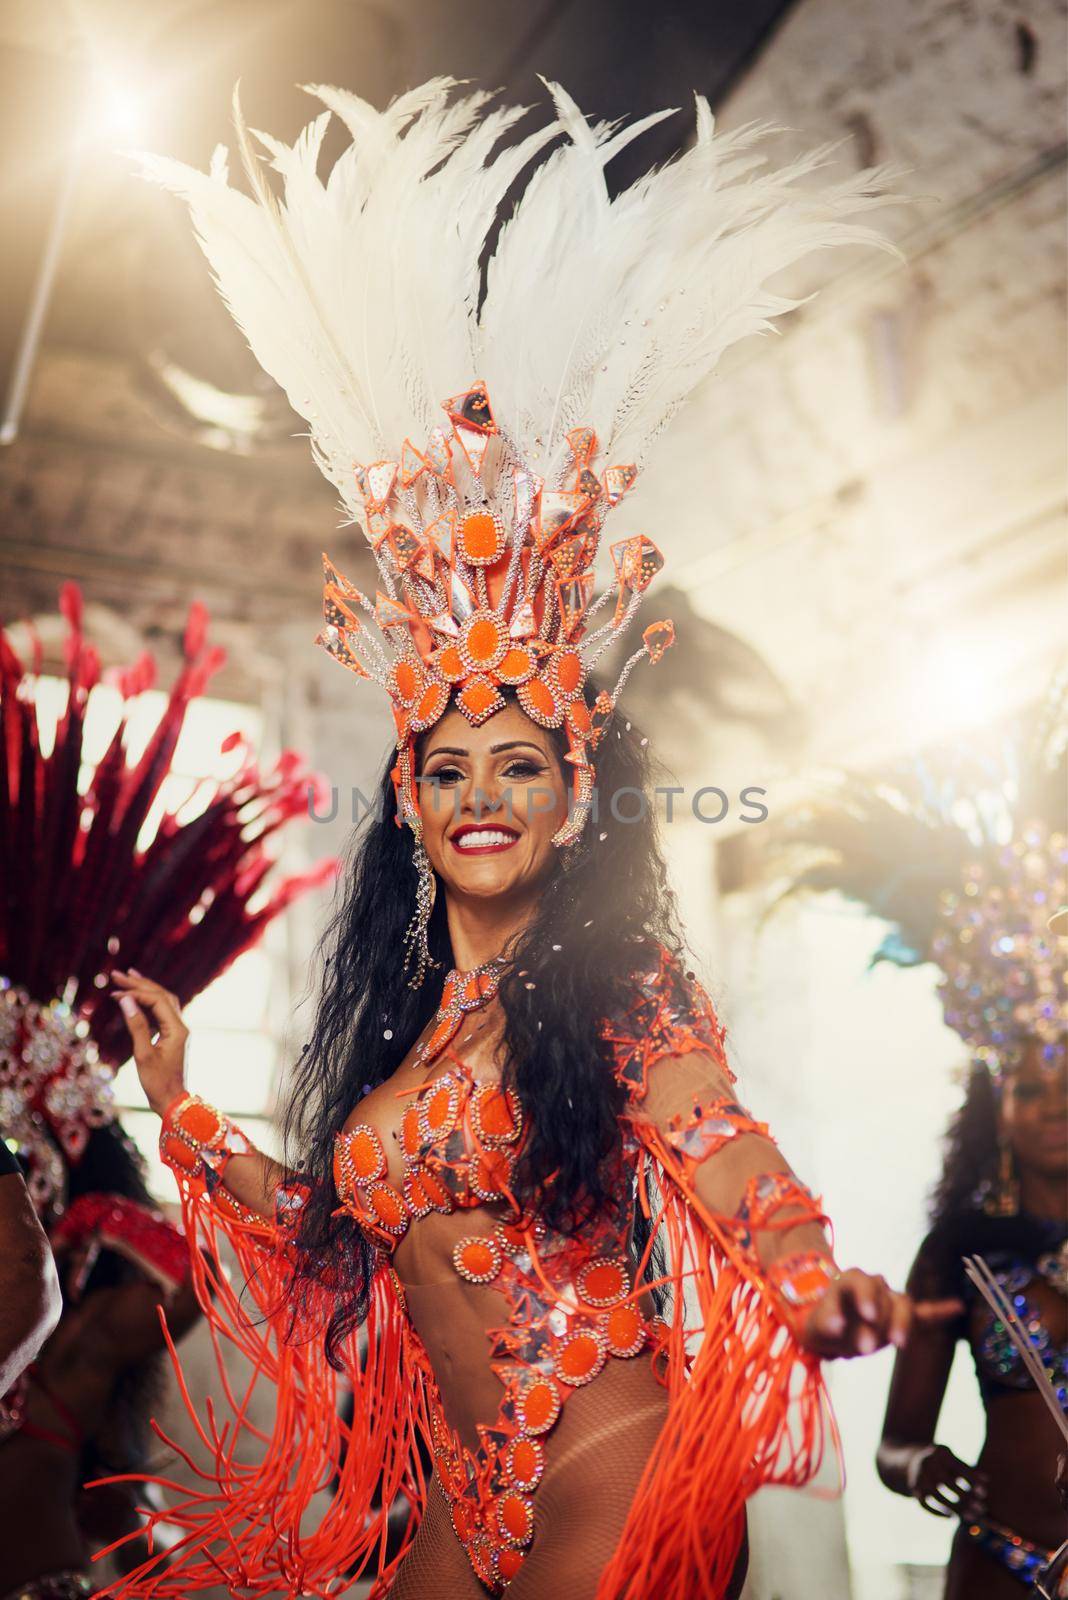 Let the festivities begin. Portrait of a cheerful female dancer wearing a vibrant costume while dancing inside a busy nightclub